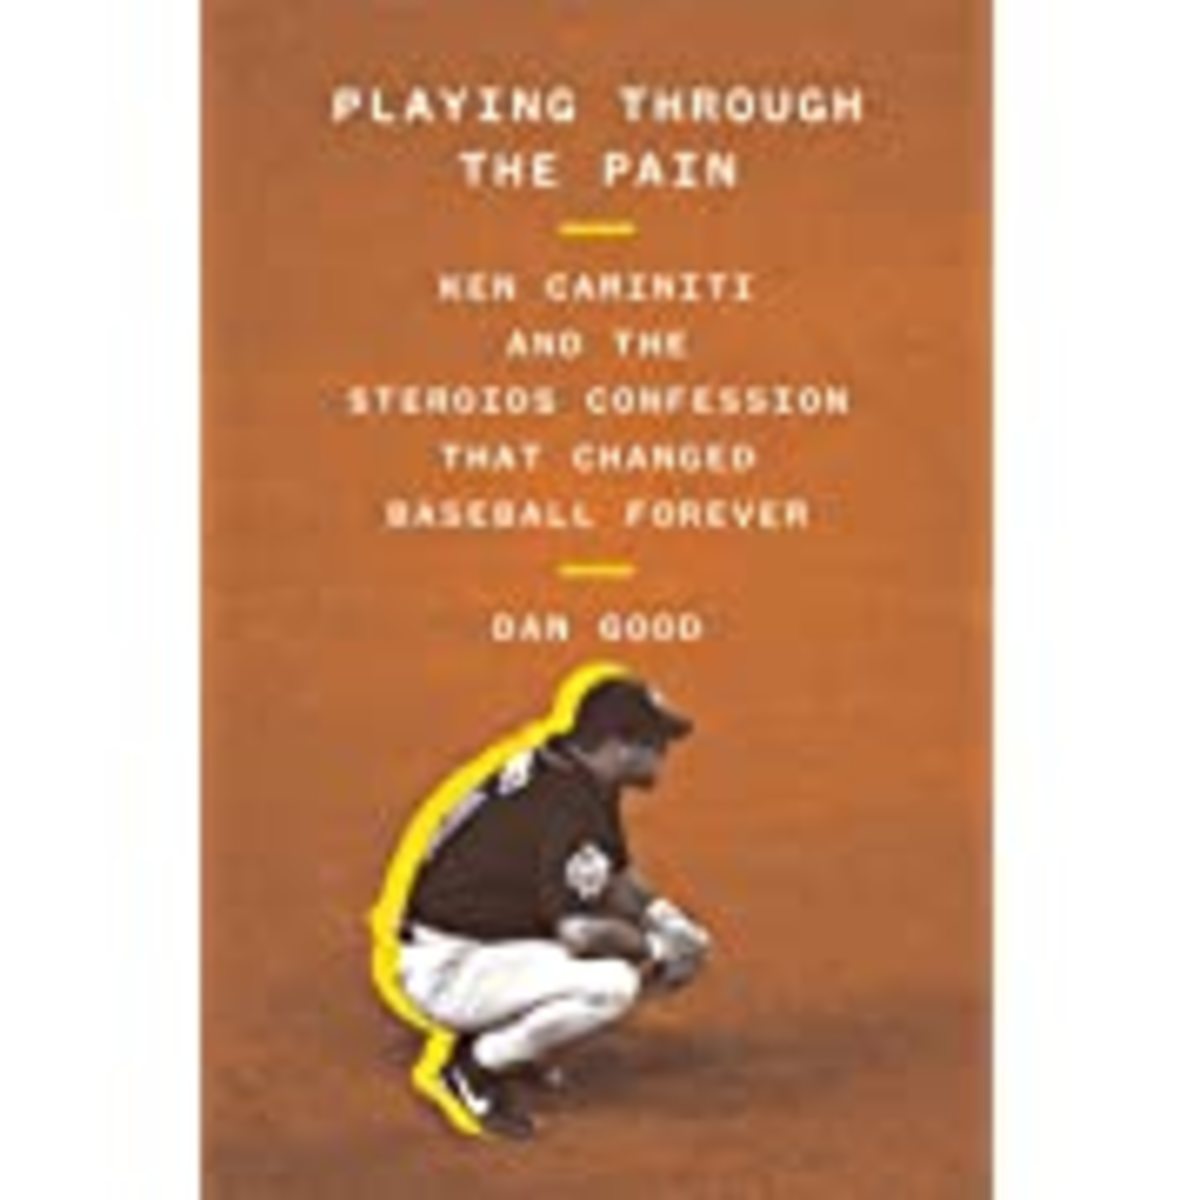 Playing Through the Pain: Ken Caminiti and the Steroids Confession That Changed Baseball Forever.